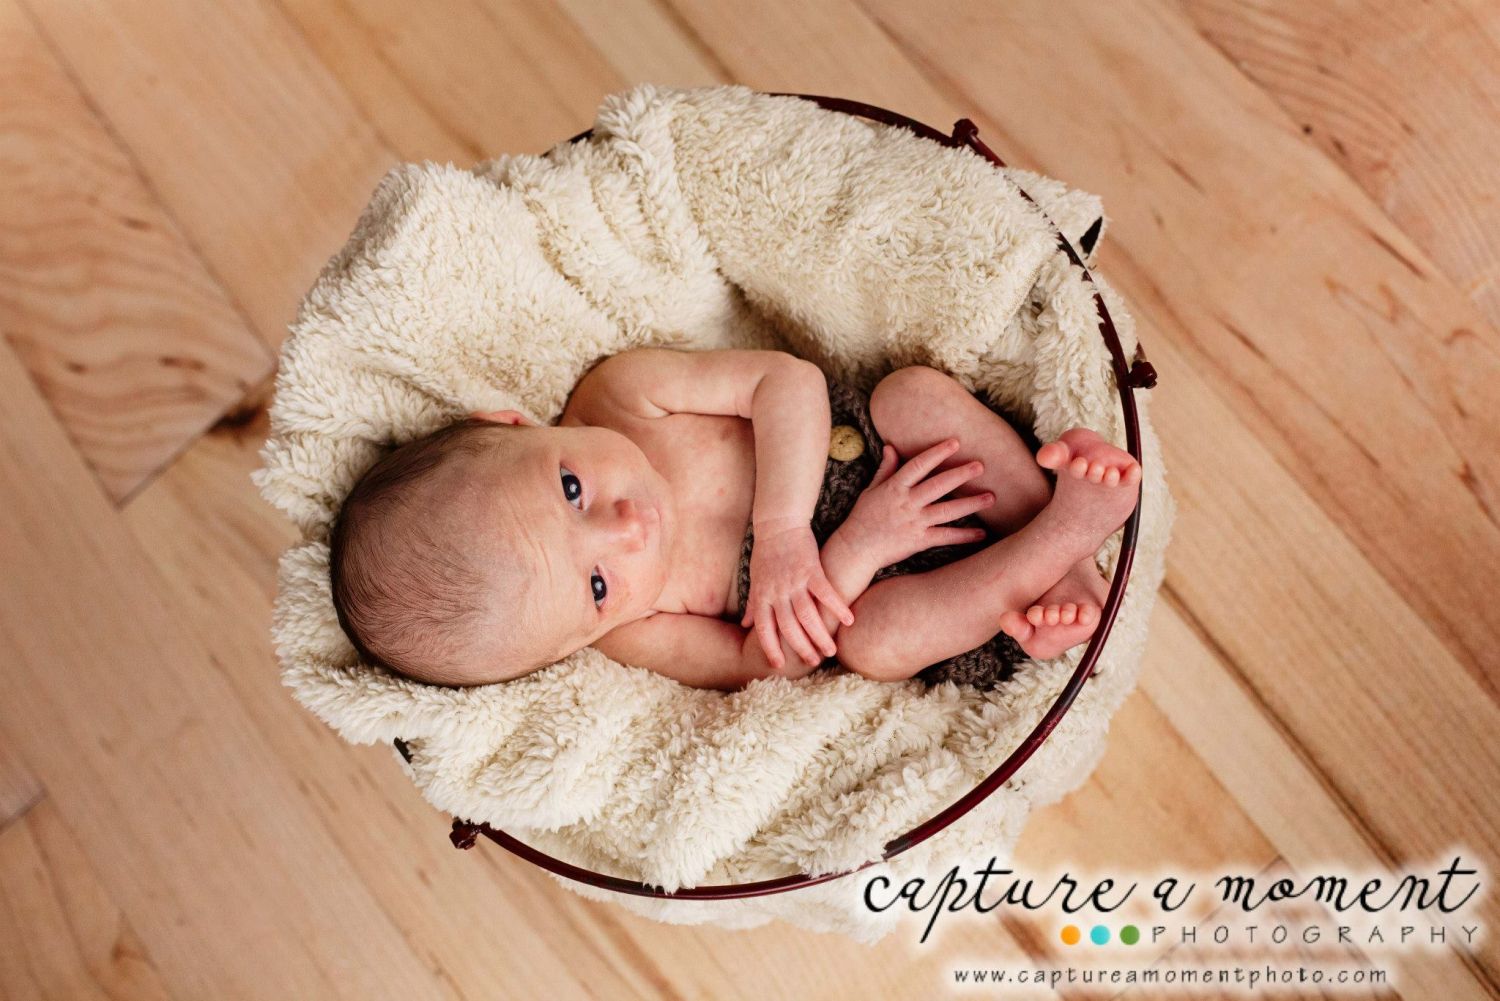 This Little Man Couldn’t Wait! | Macomb County Newborn Photography | 1898785_679824905374156_904684850_o.jpg